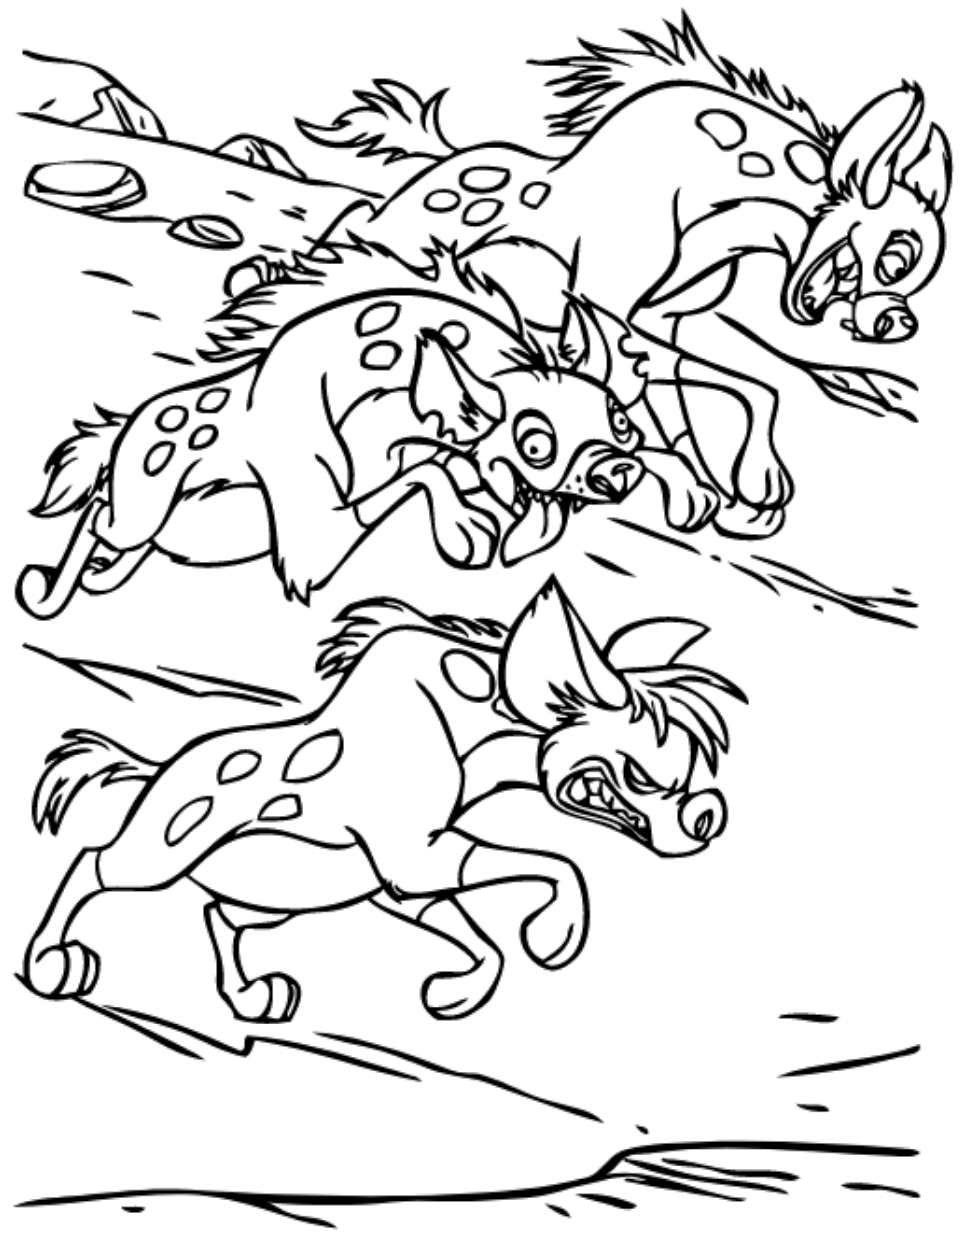 Shenzi, Banzai And Ed Coloring Page - Free Printable Coloring Pages for